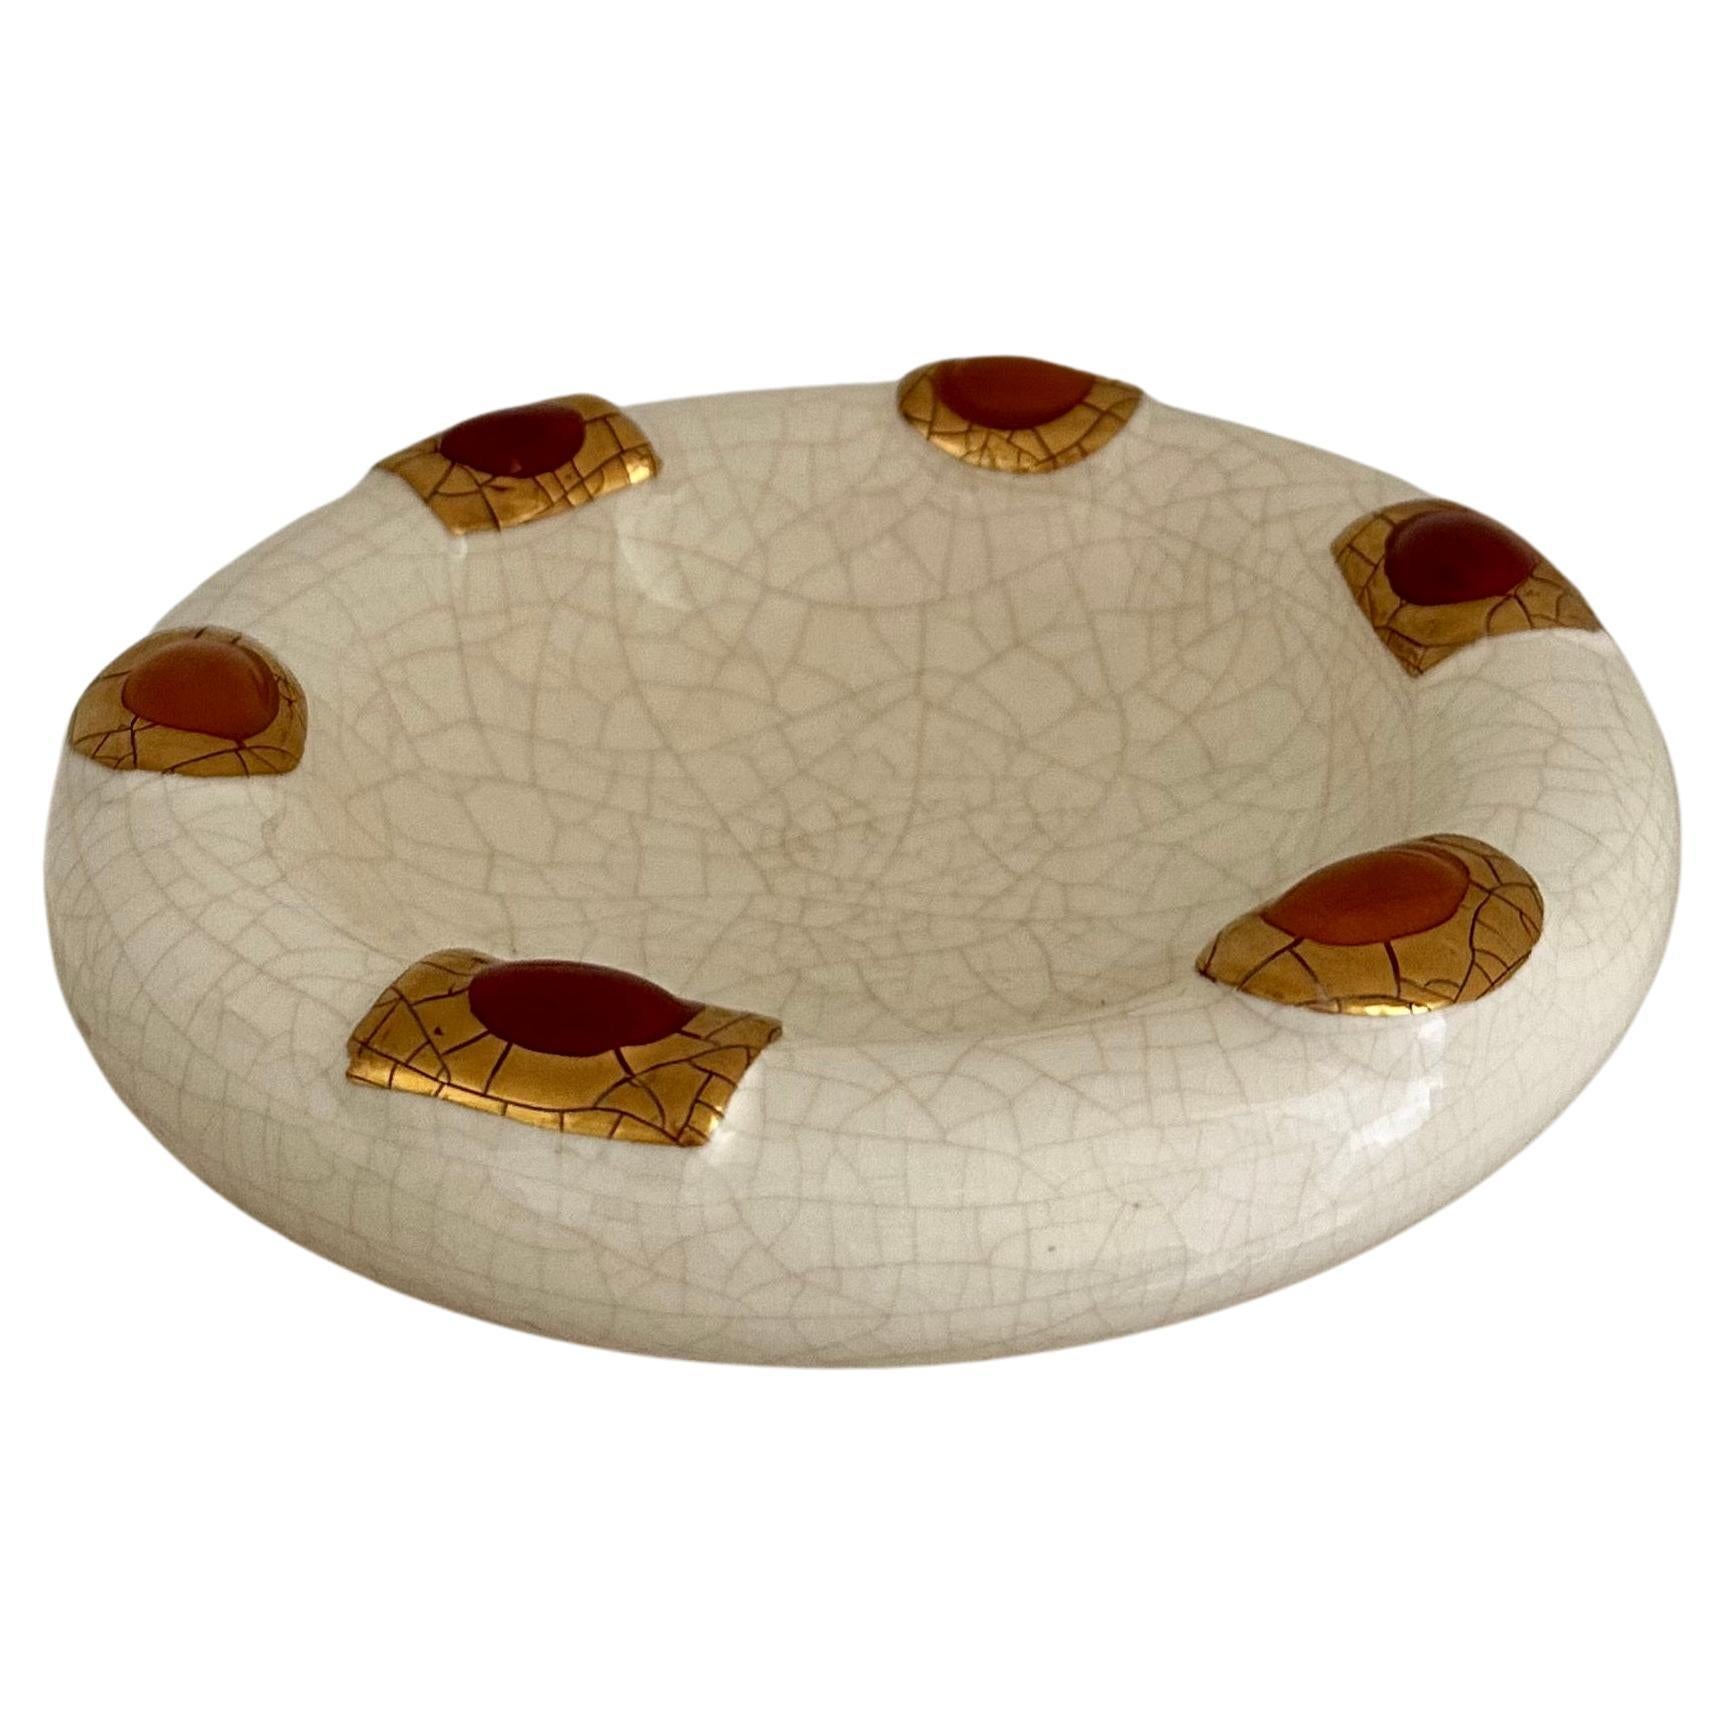 Vintage Longwy art deco style earthenware bowl decorated with cream crackled glaze and enamelled yellow and red cabochons encircled with gold. A beautiful and rare modernist dish by Faienceries de Longwy Depuis, France. Most likely produced in the